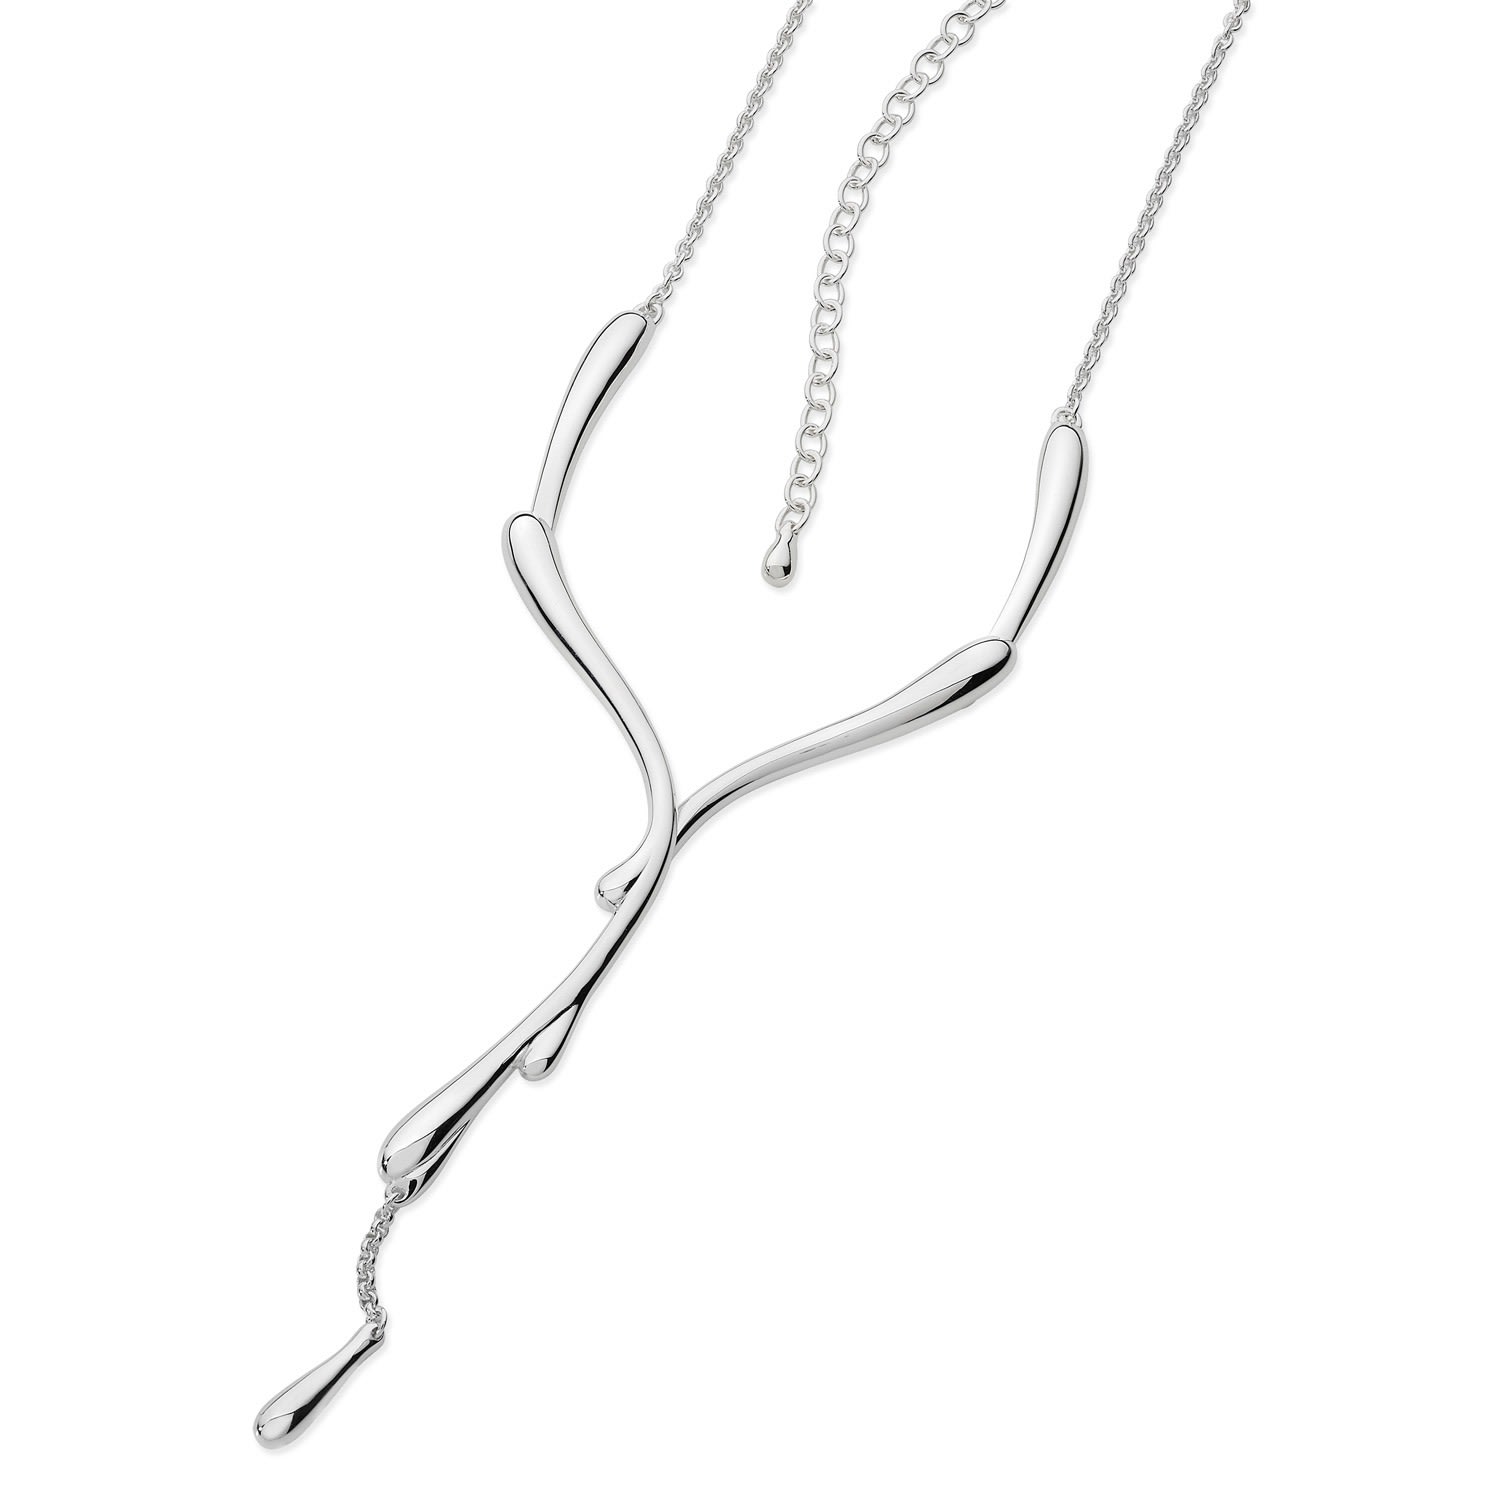 Women’s Silver Dripping Necklace Lucy Quartermaine